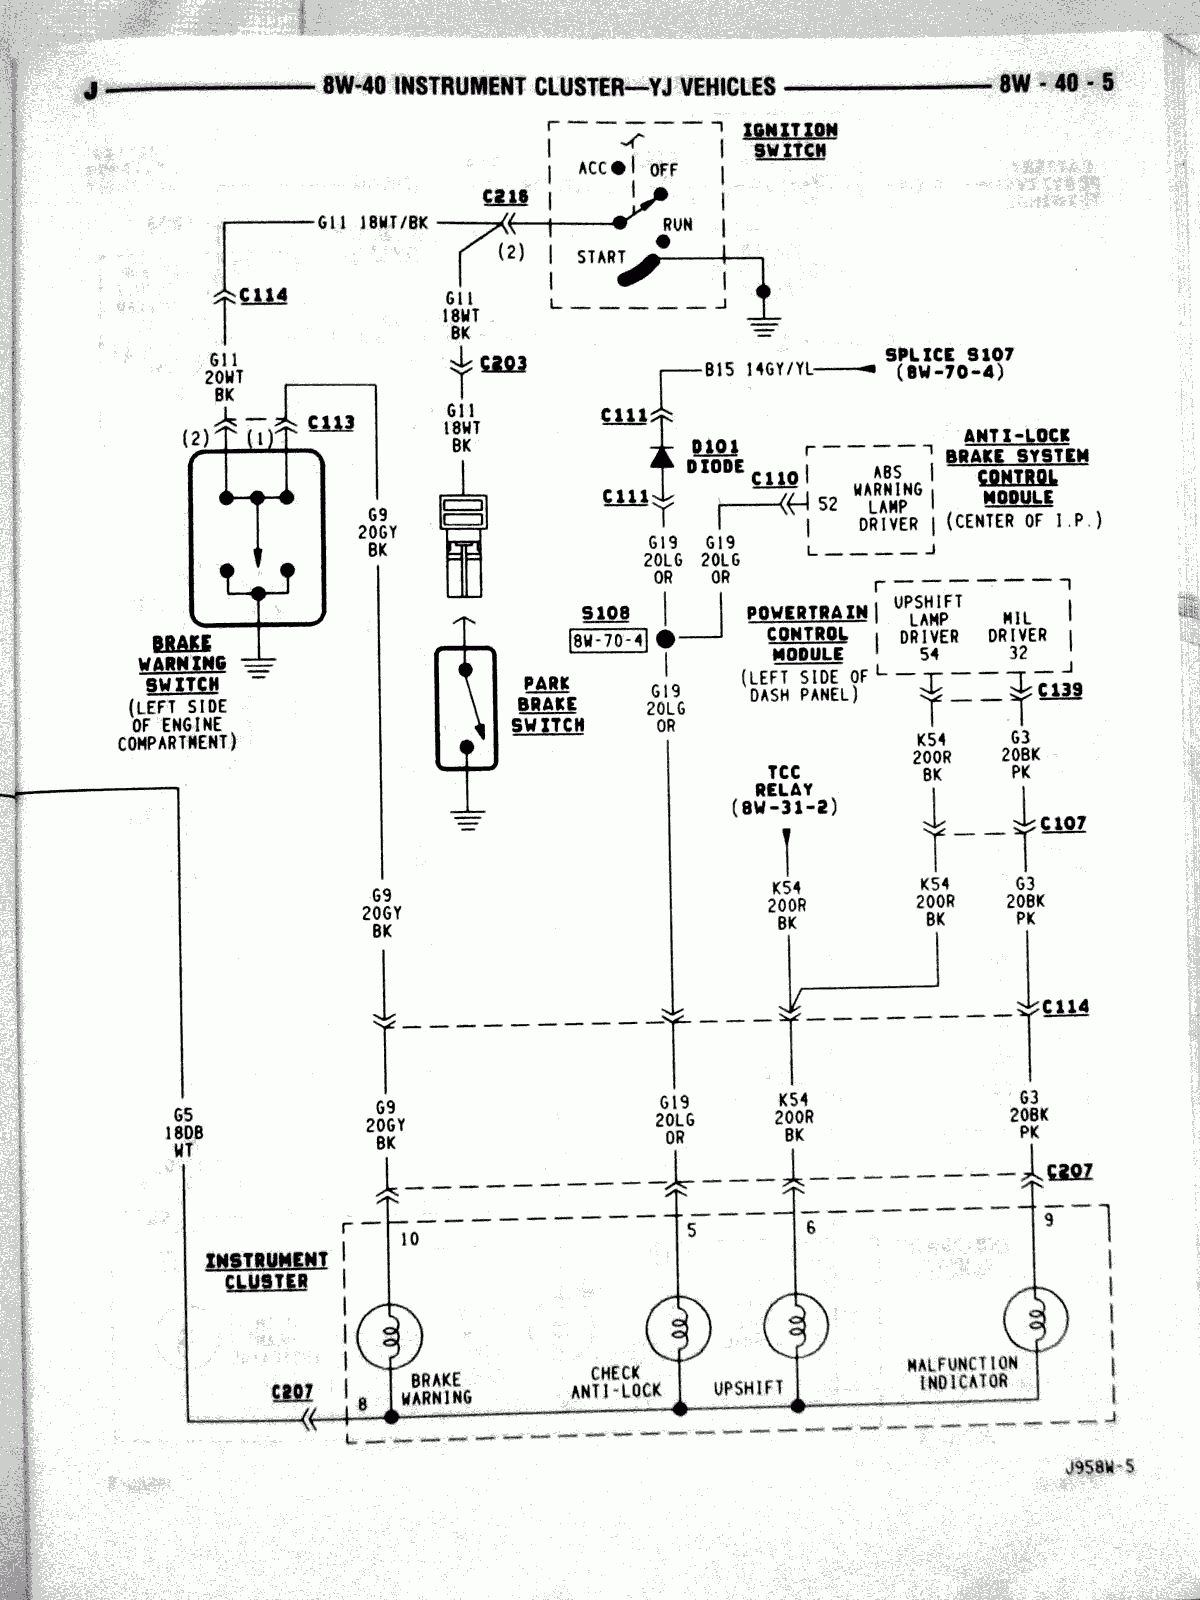 Jeep Yj Wiring Horn Color - Data Wiring Diagram Today - Car Horn Wiring Diagram